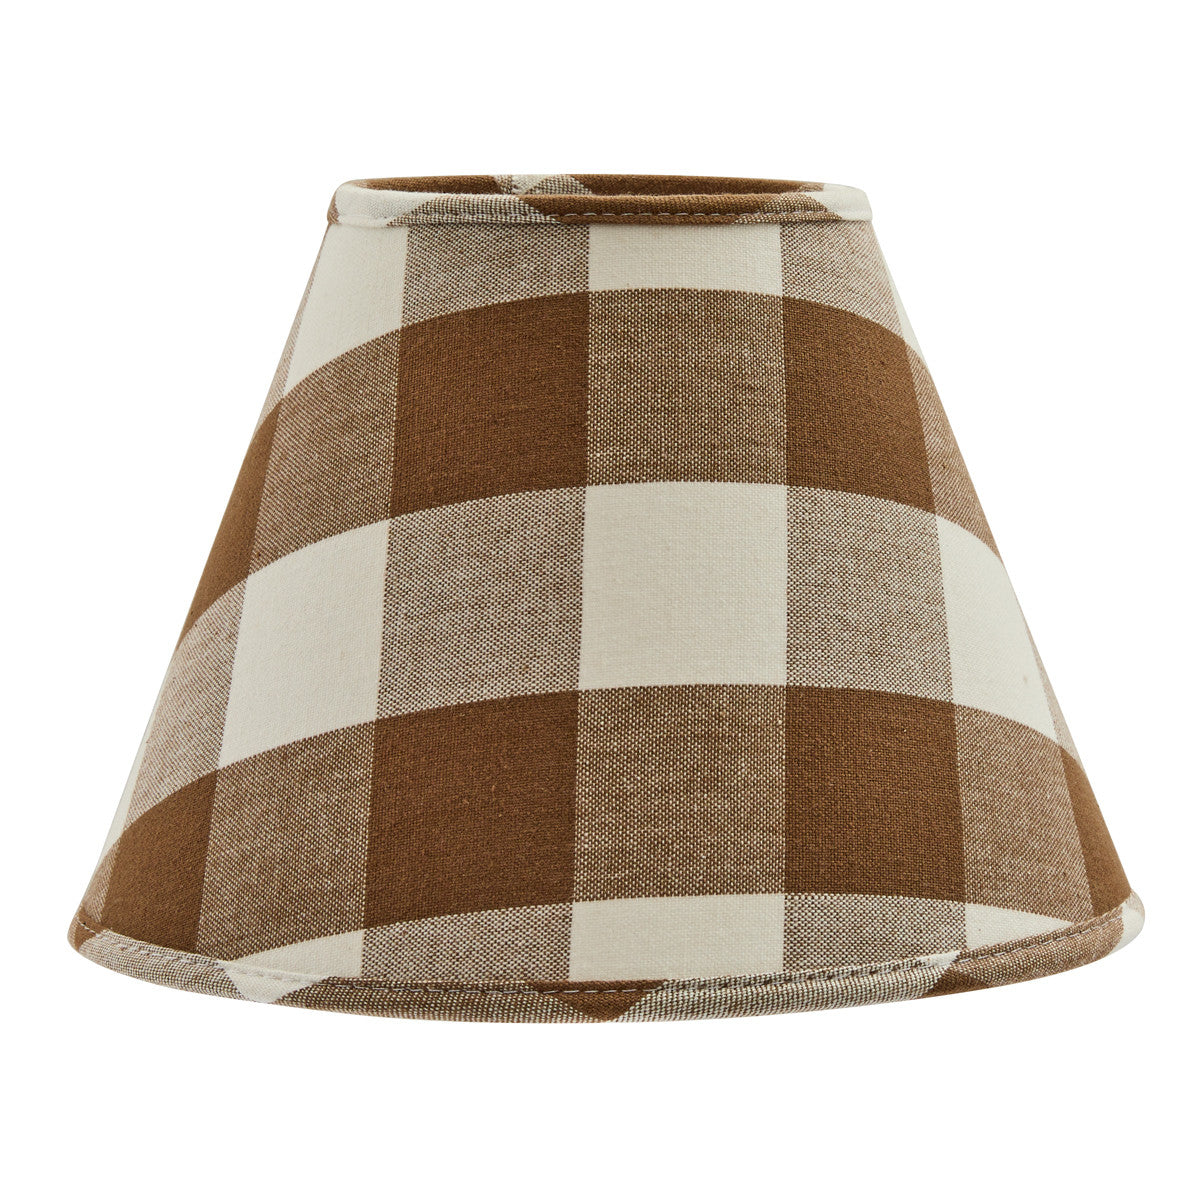 Wicklow Check Brown & Cream Lamp Shade - 10"Set of 2  Park Designs